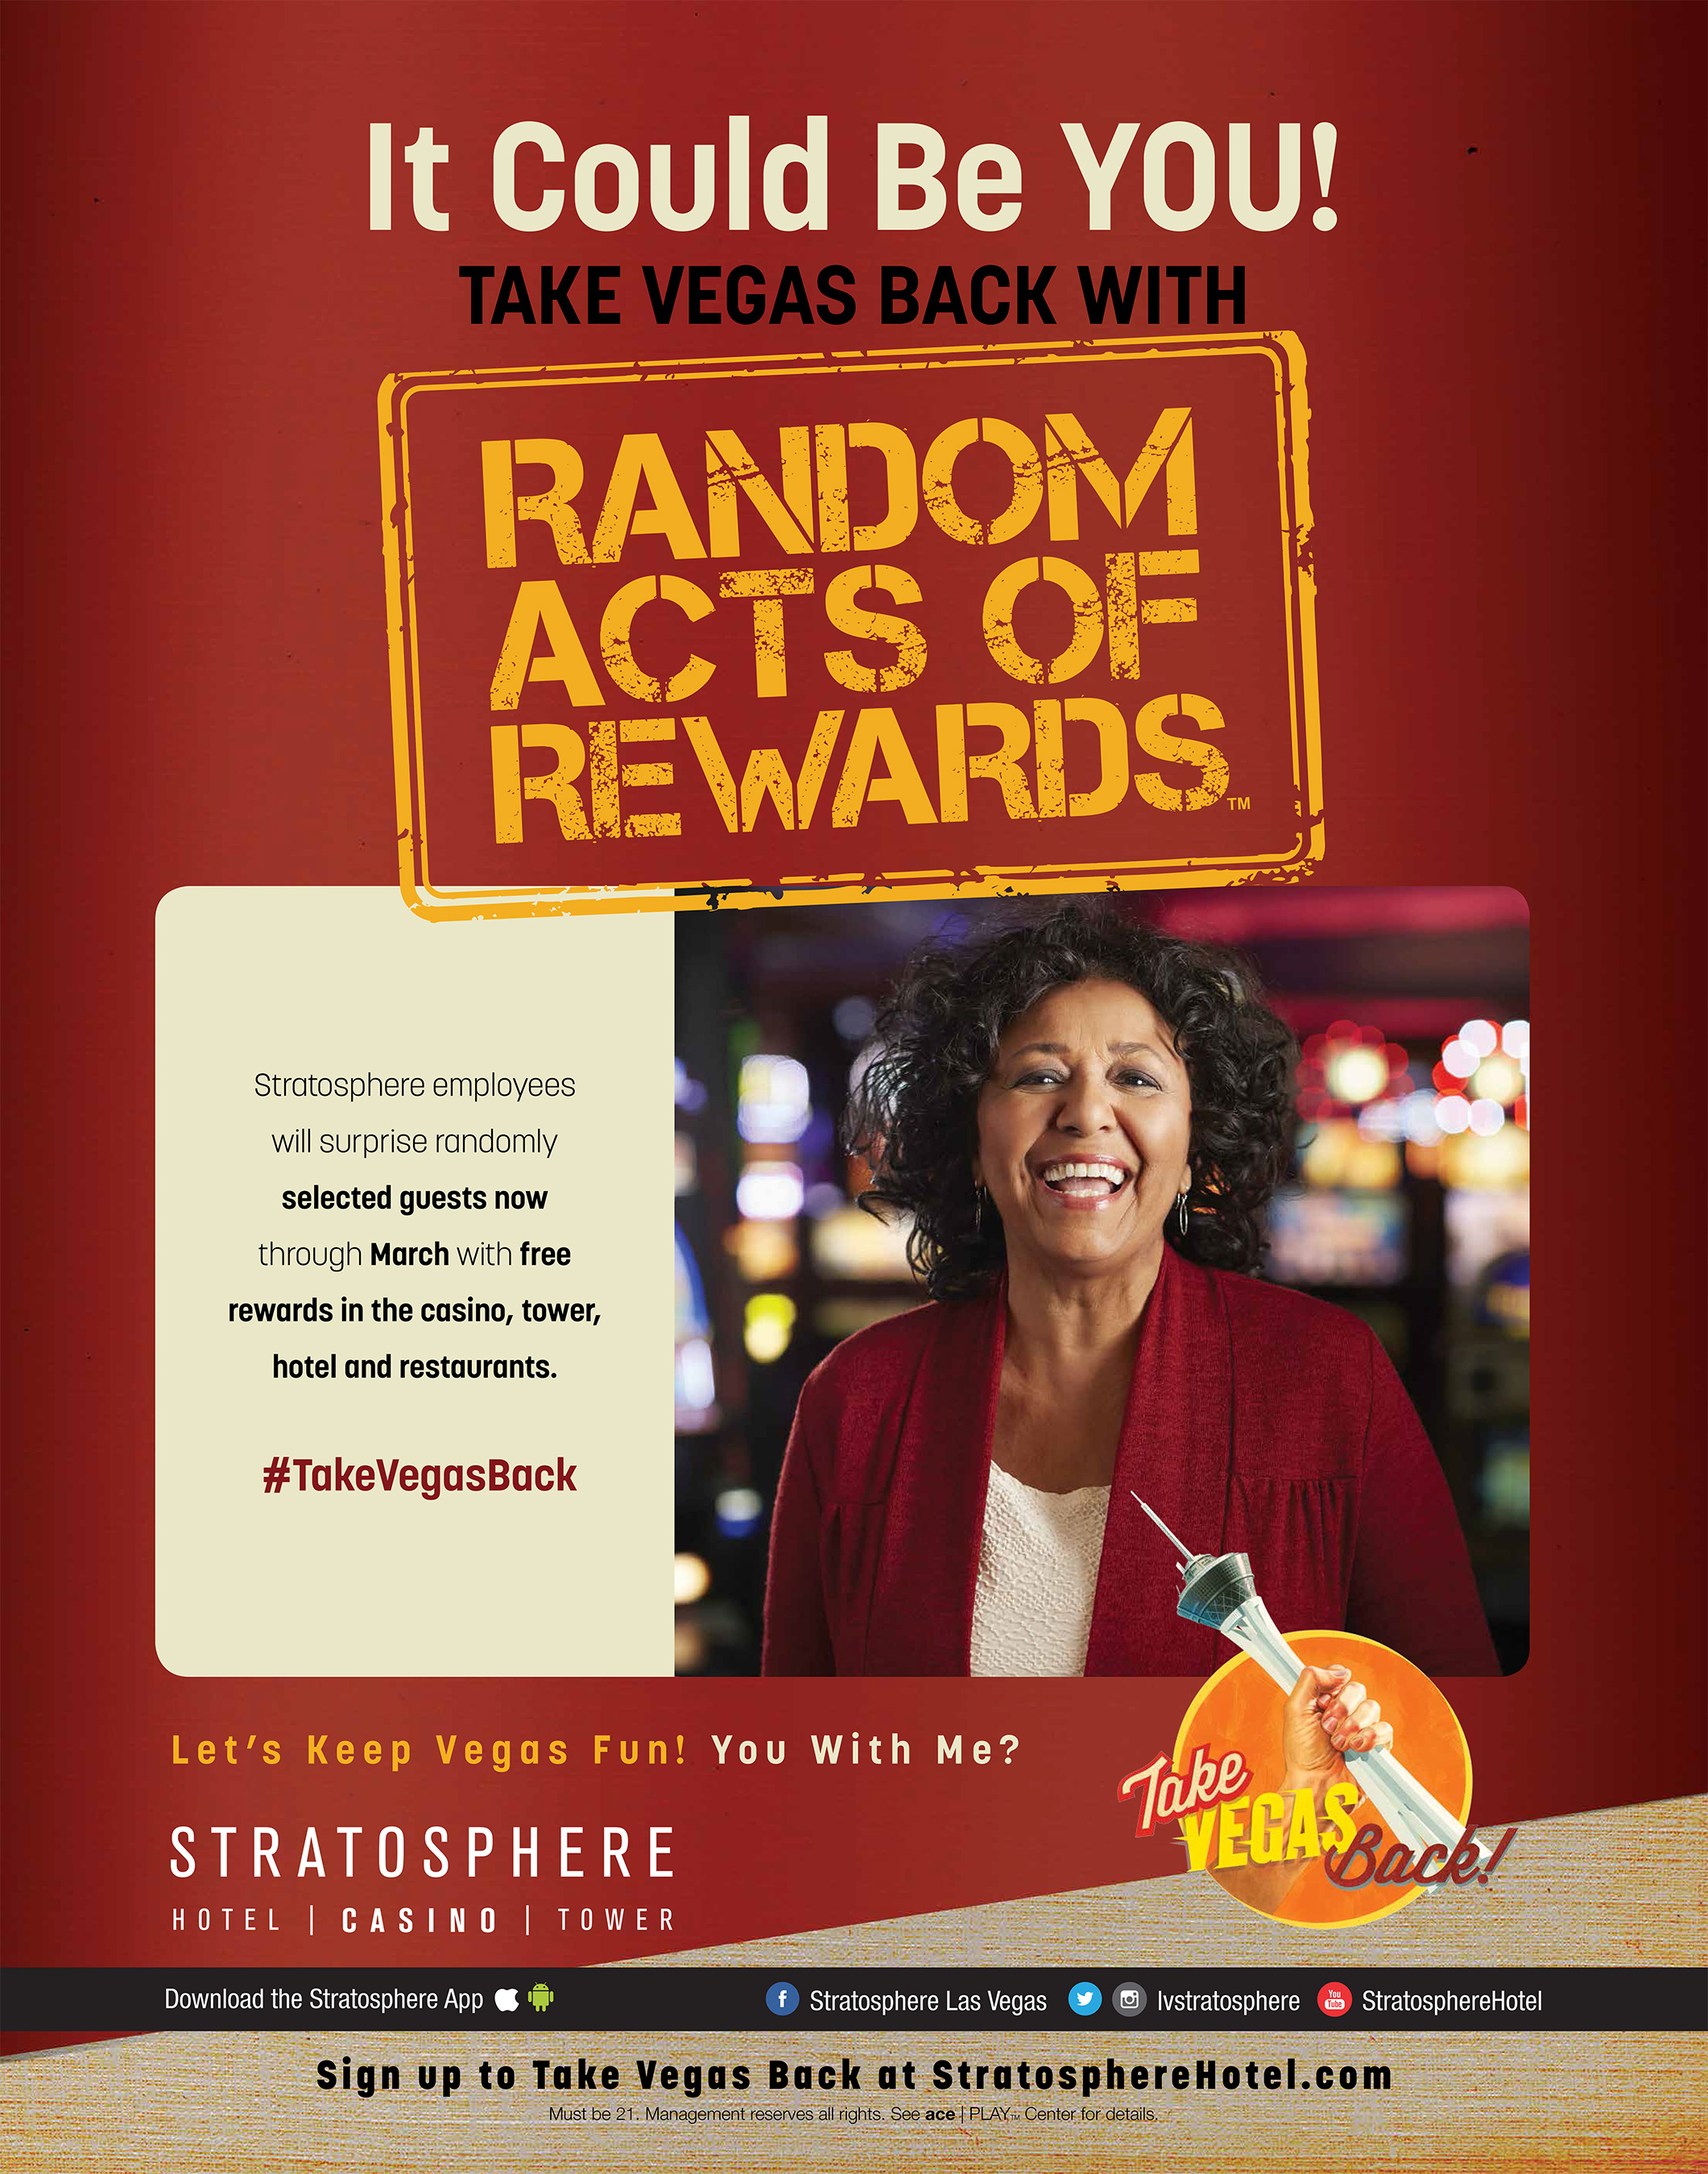 In addition to offering guests affordable options every day, Stratosphere will also surprise its guests with Random Acts of RewardsTM, an extension of its Take Vegas Back campaign.